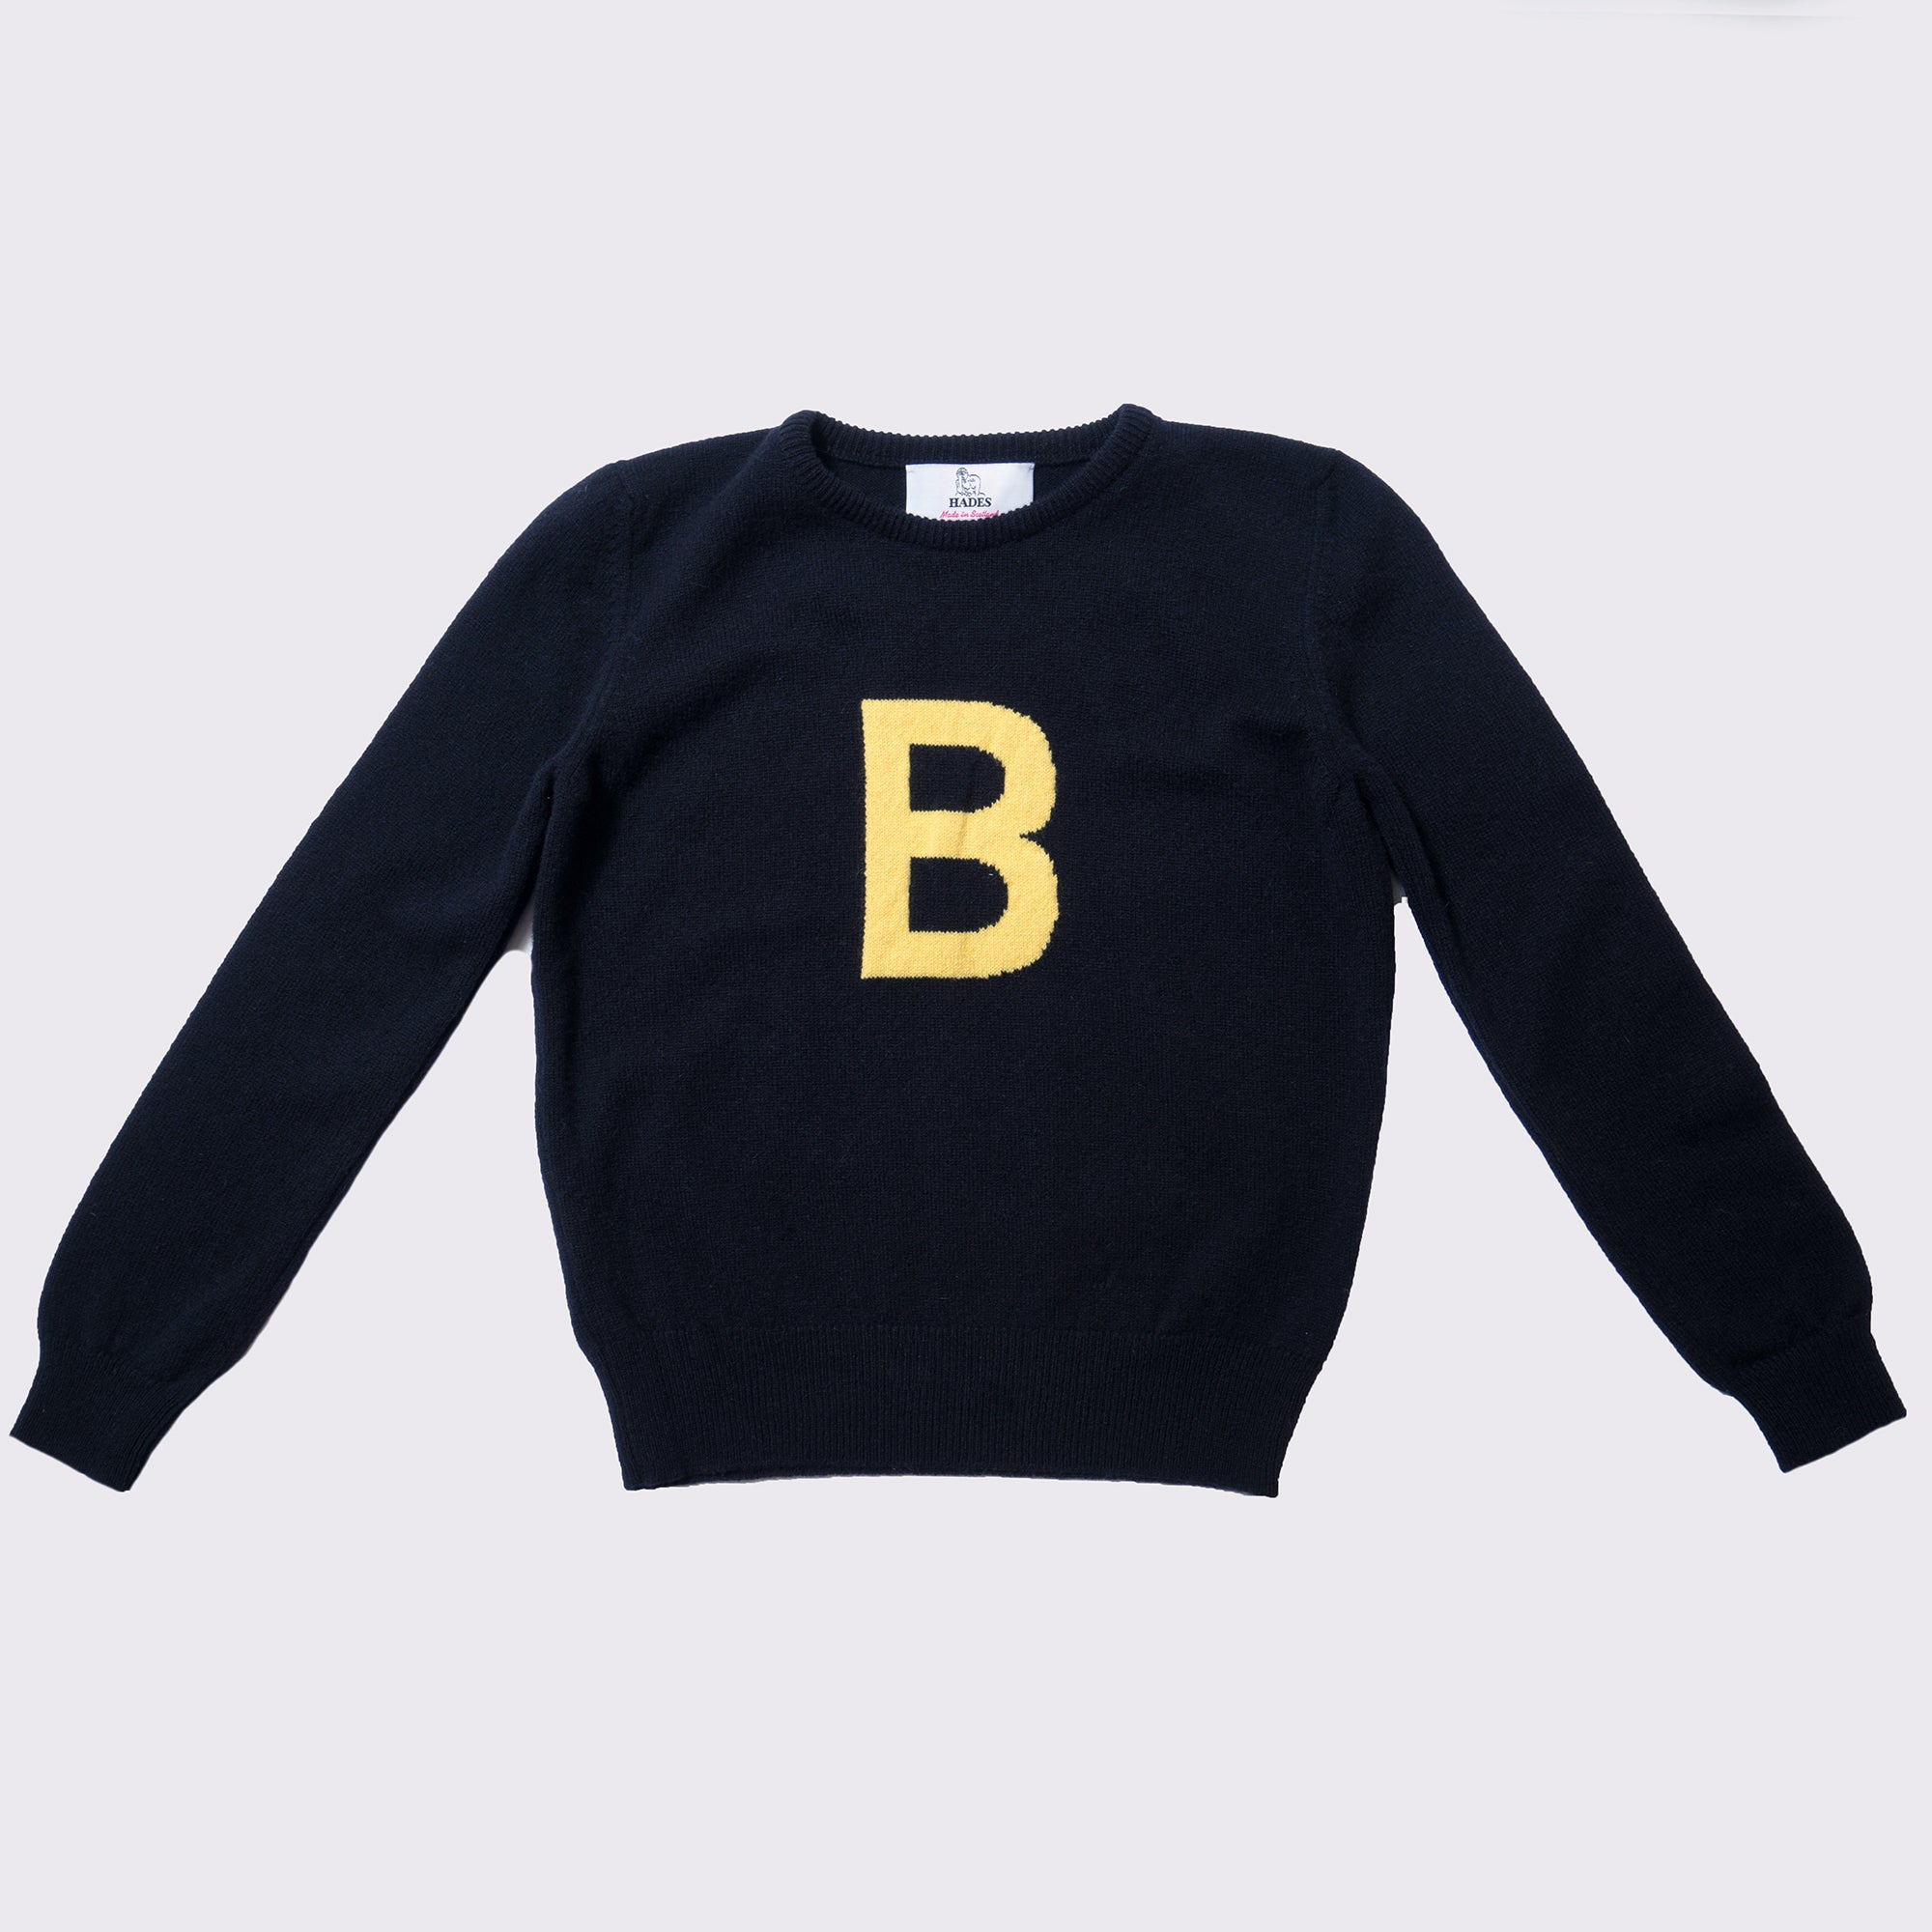 Archive - one off - Alphabet B Knit